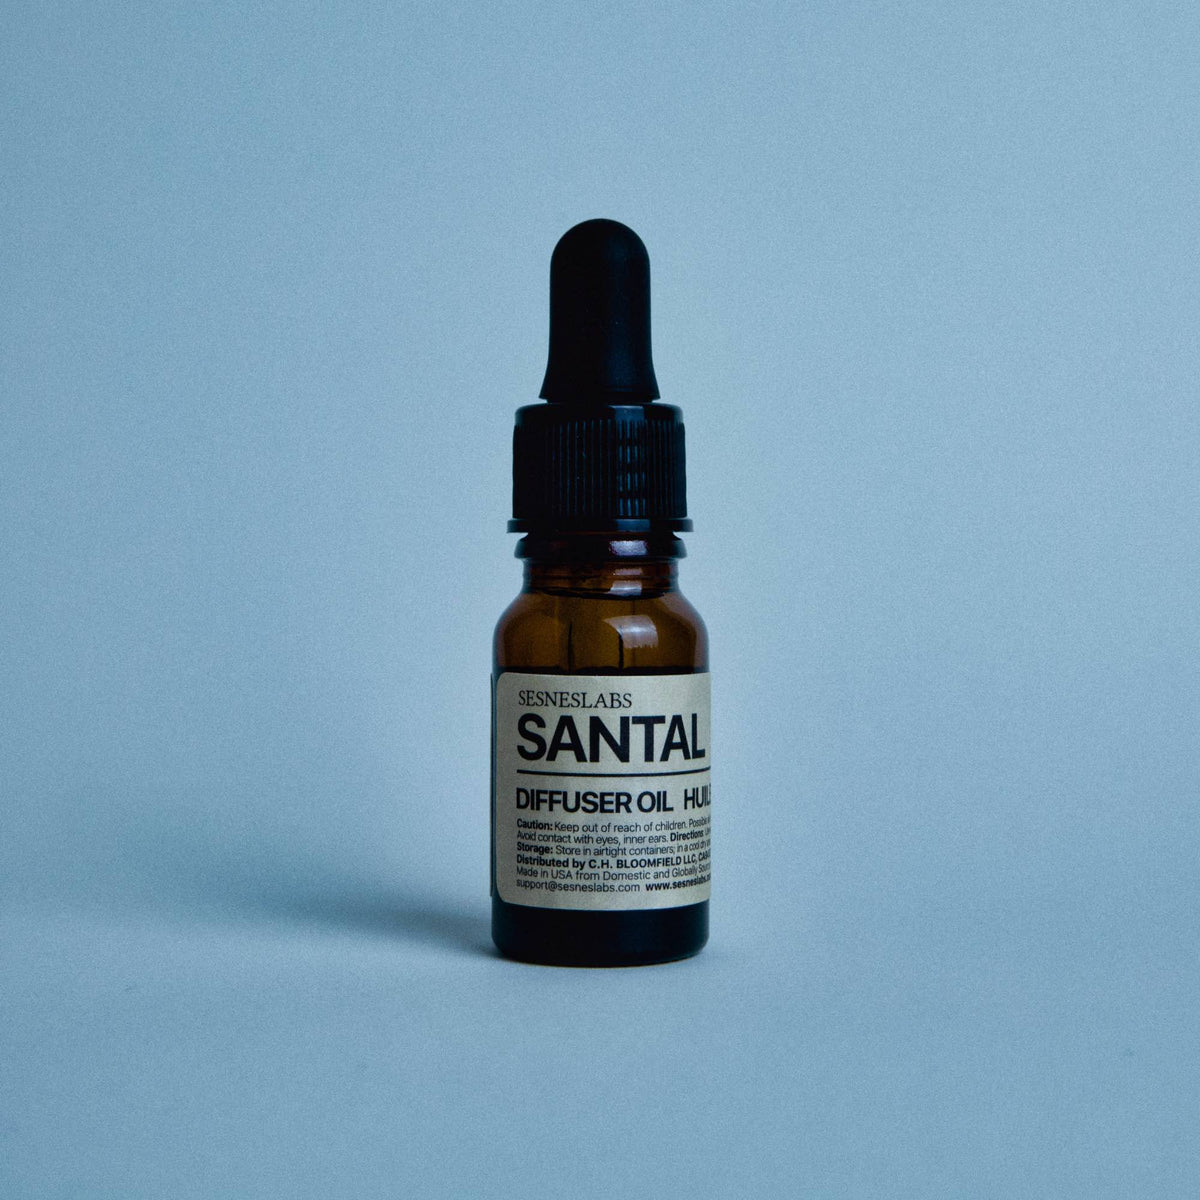  Santal Diffuser Oil, Natural Blend of Essential and Fragrance  Oils, Alcohol-free, Aromatherapy Scent for Ultrasonic Diffuser, 0.34 oz, 33  : Handmade Products